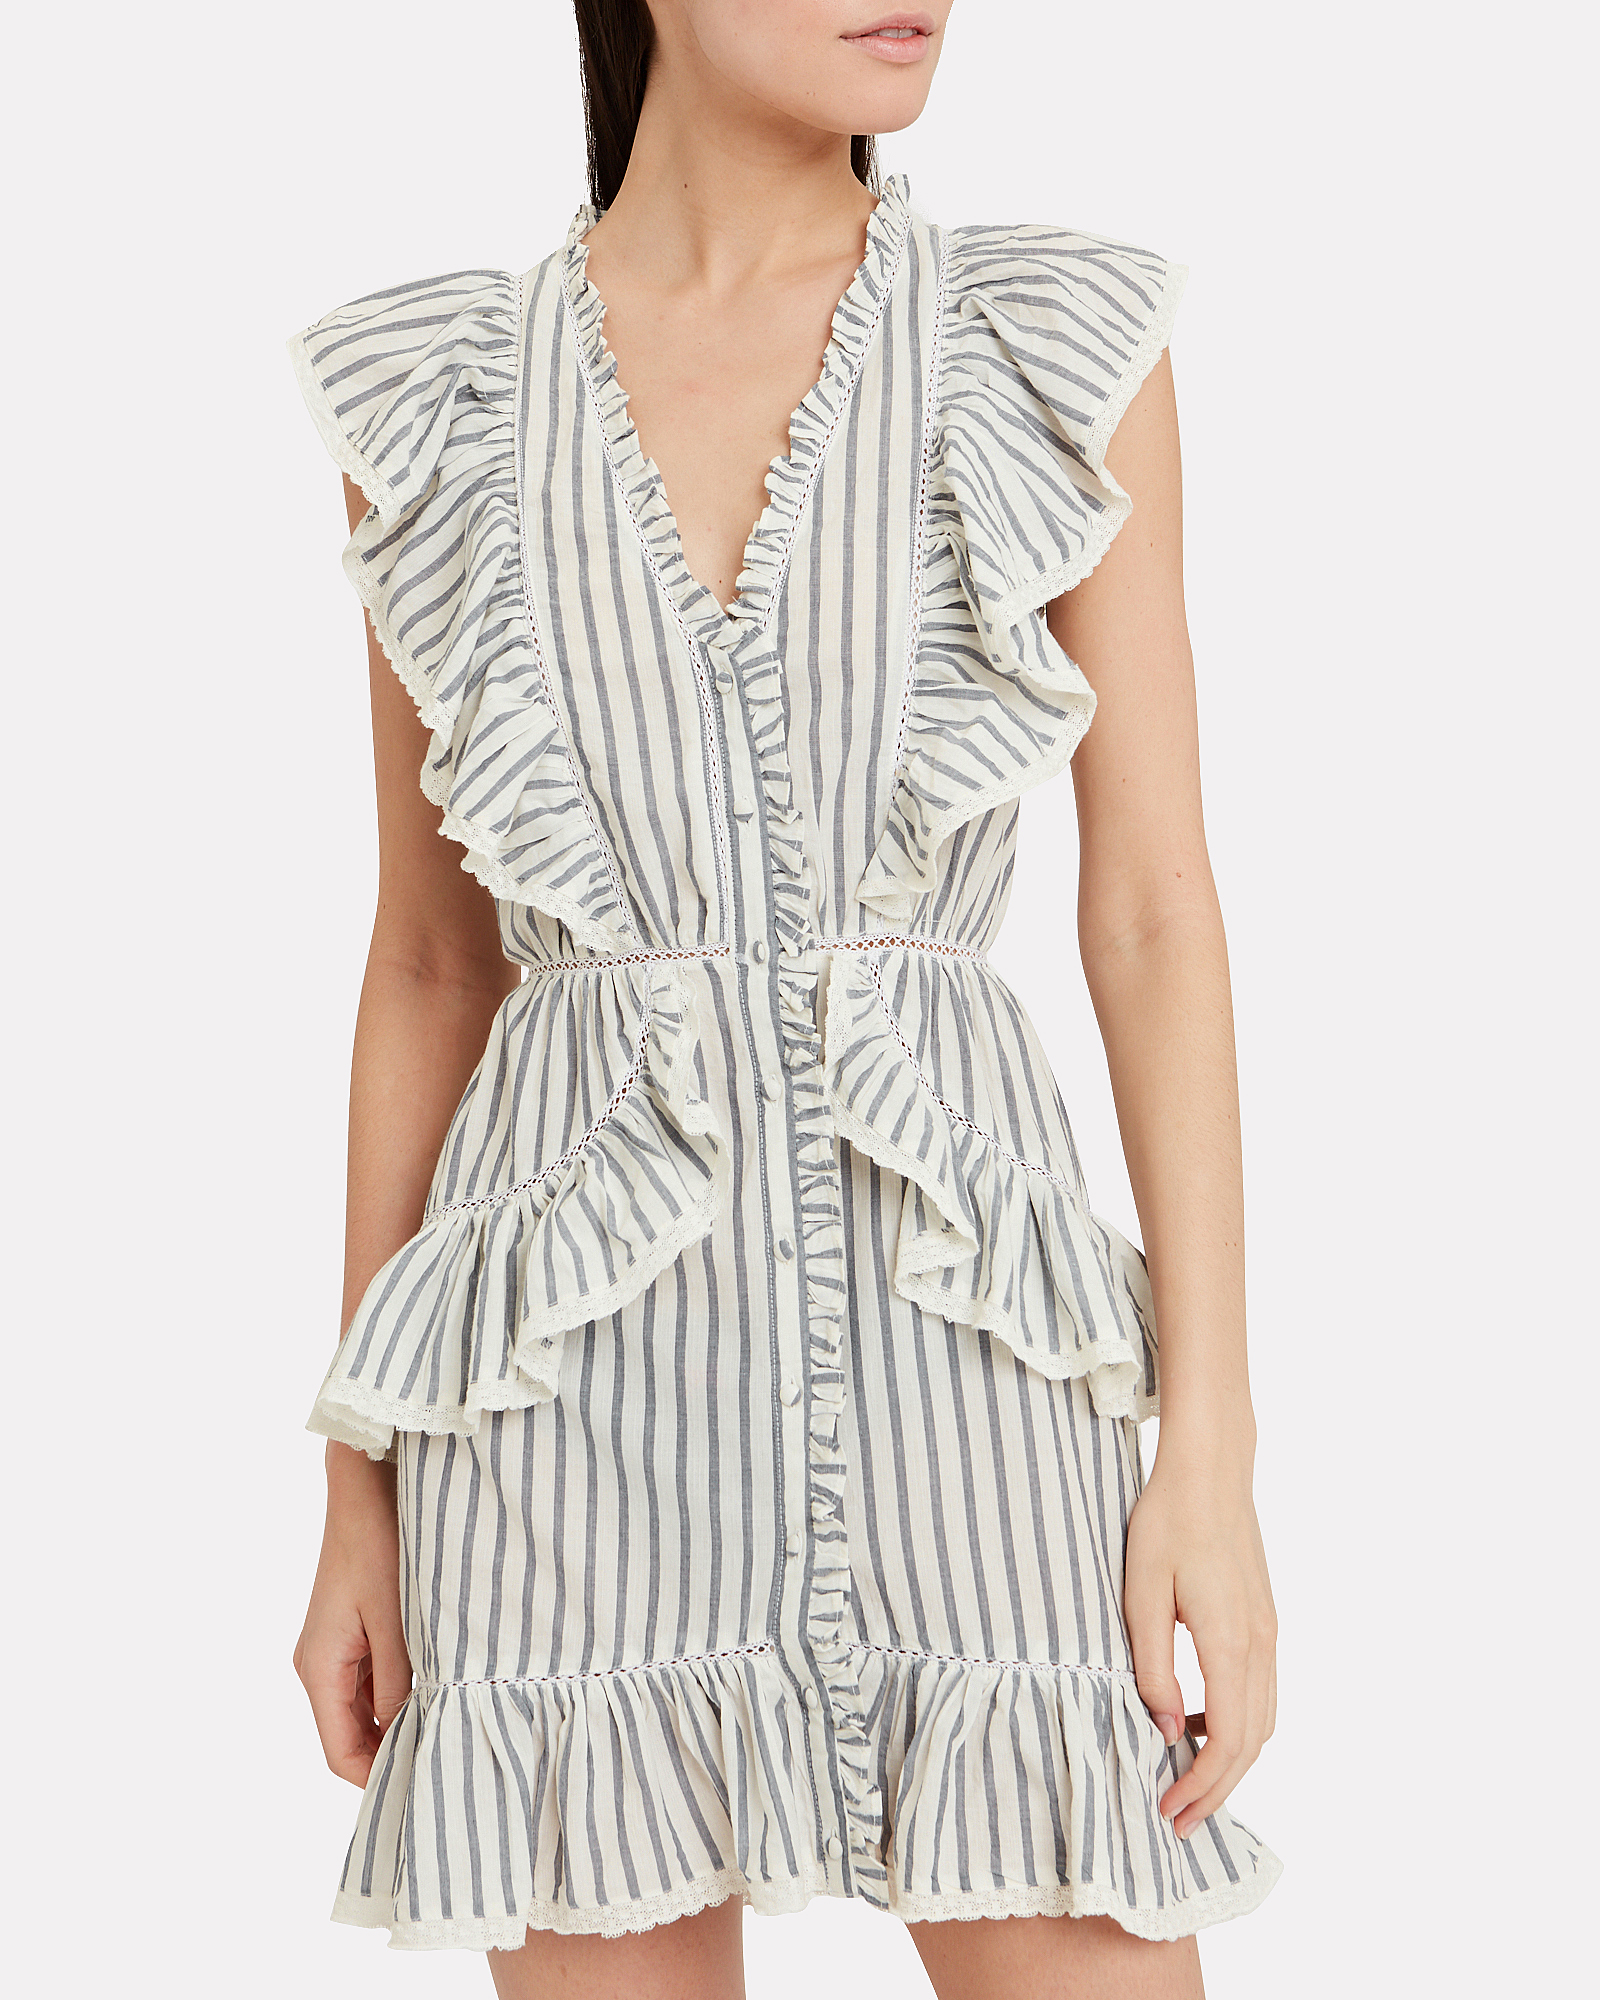 India Striped Voile Dress